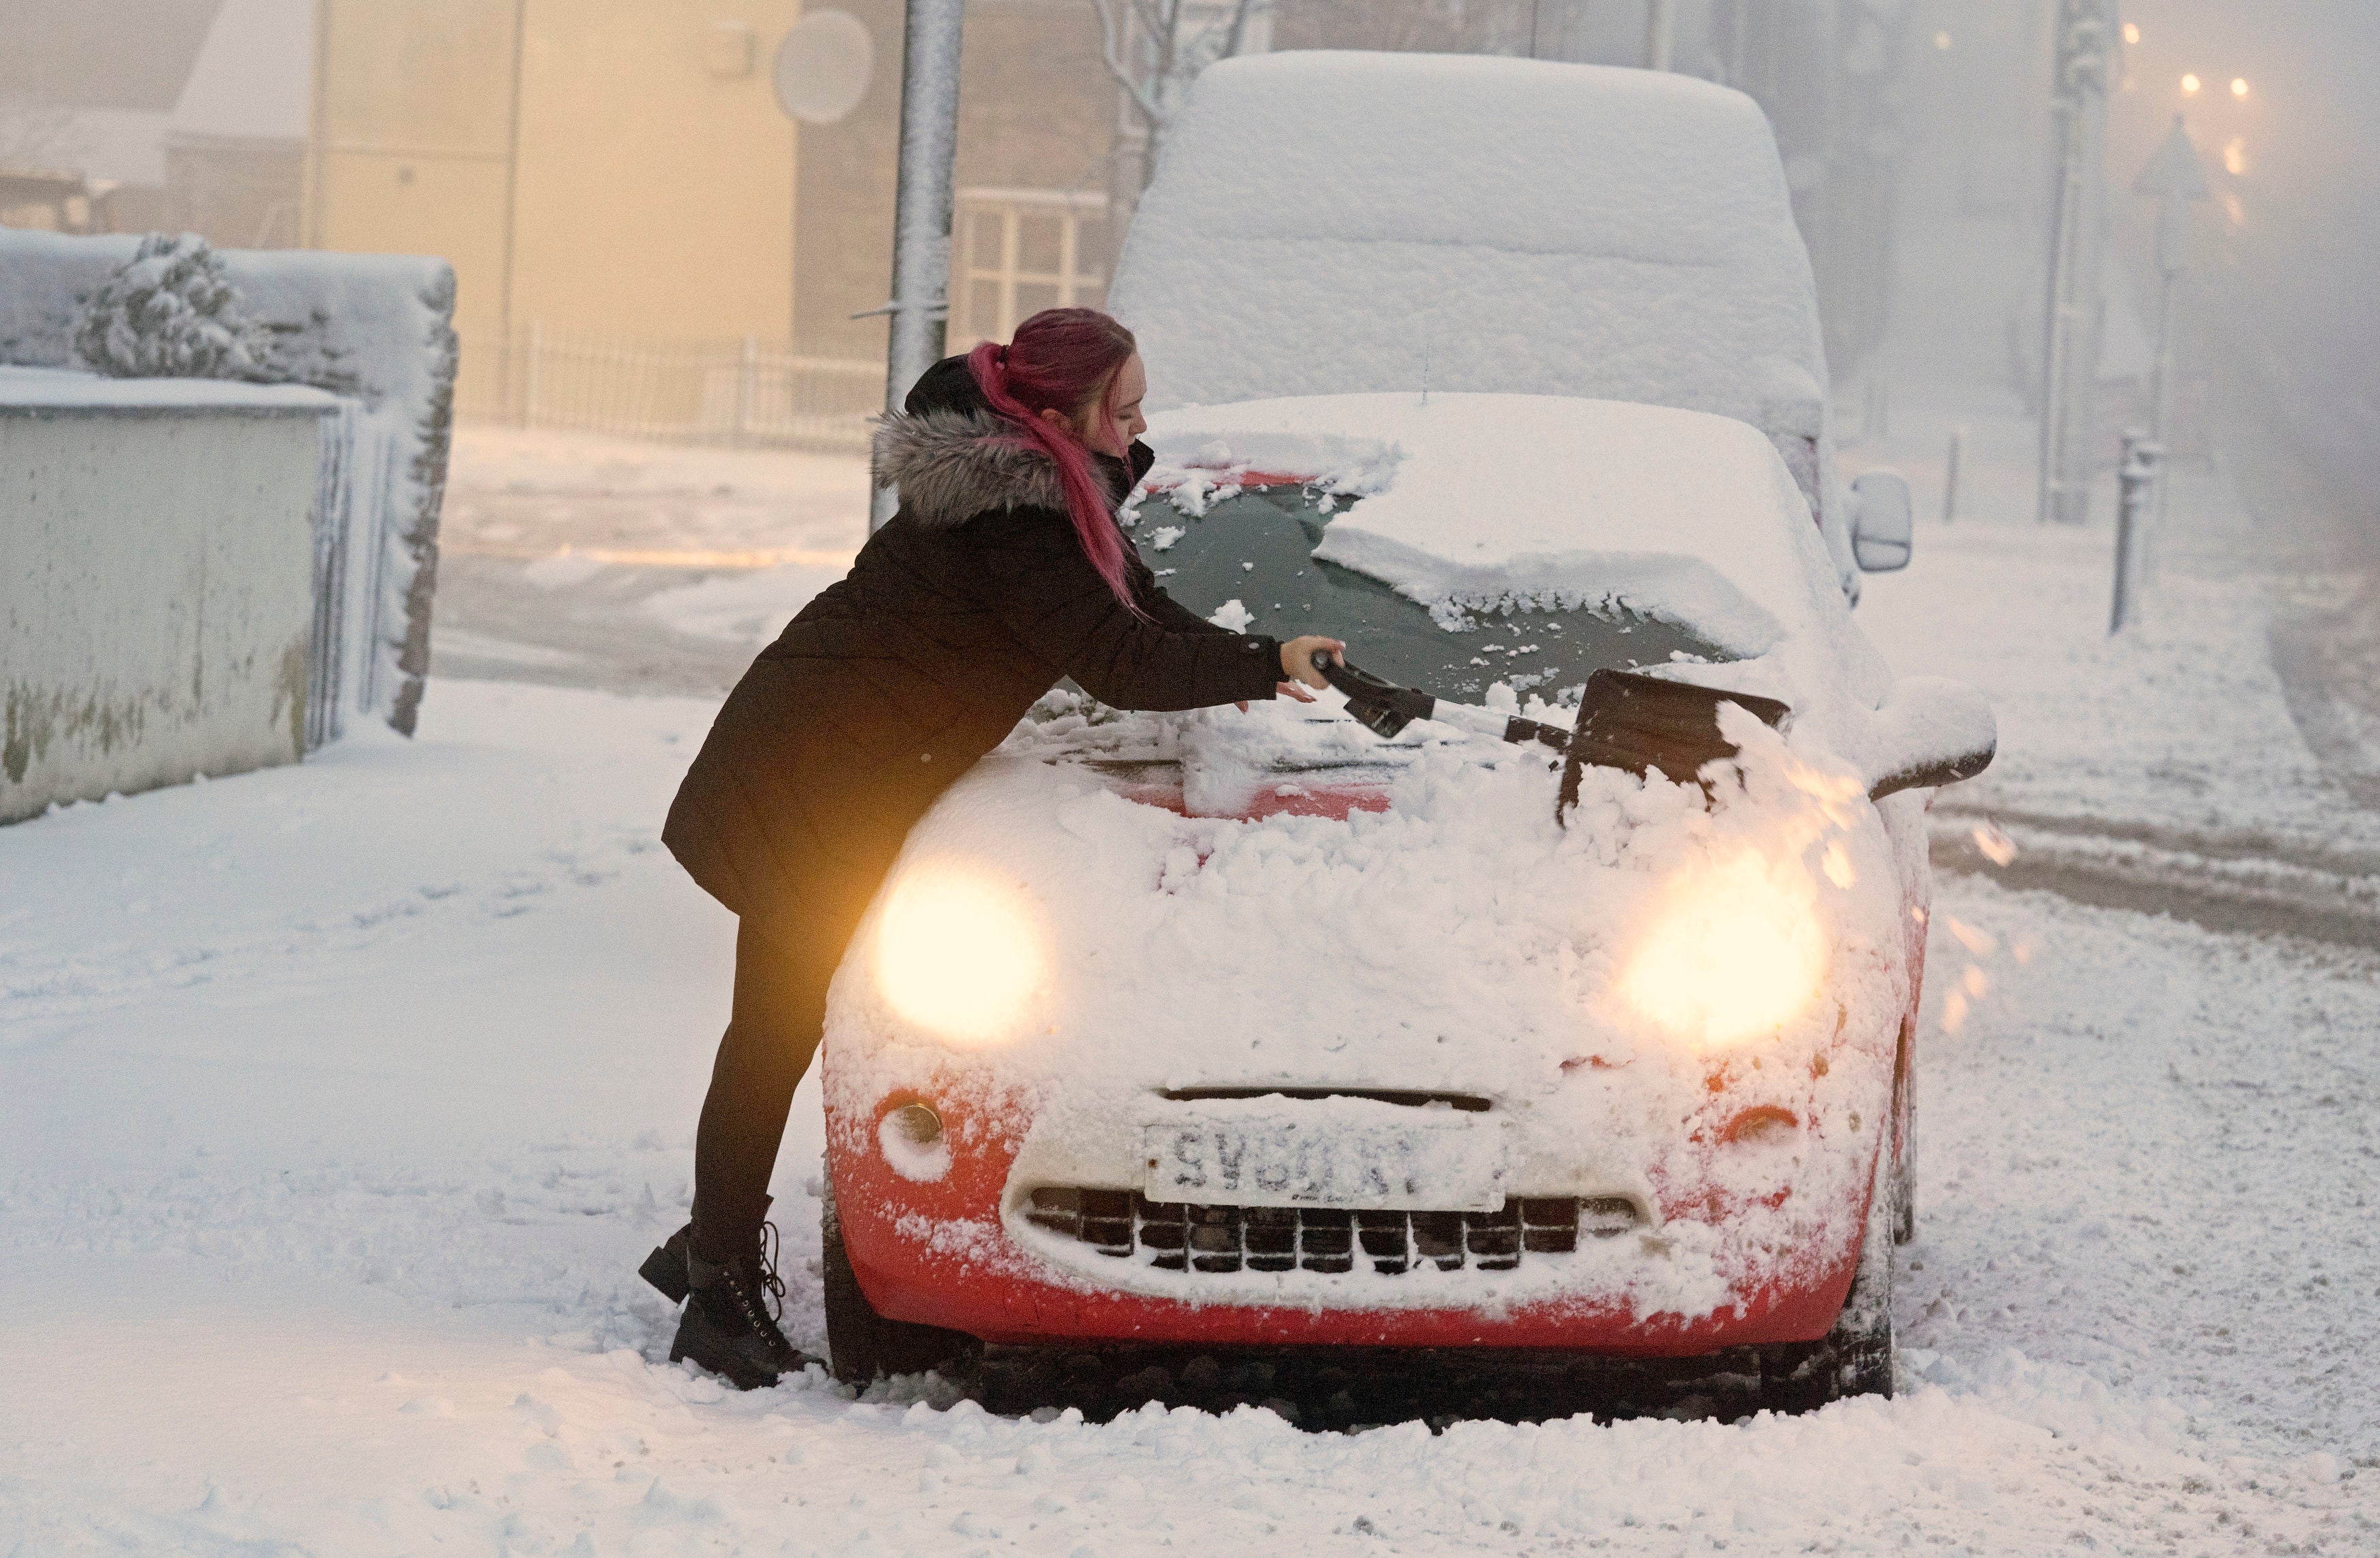 A woman clears snow from her car as Storm Eunice sweeps across the UK